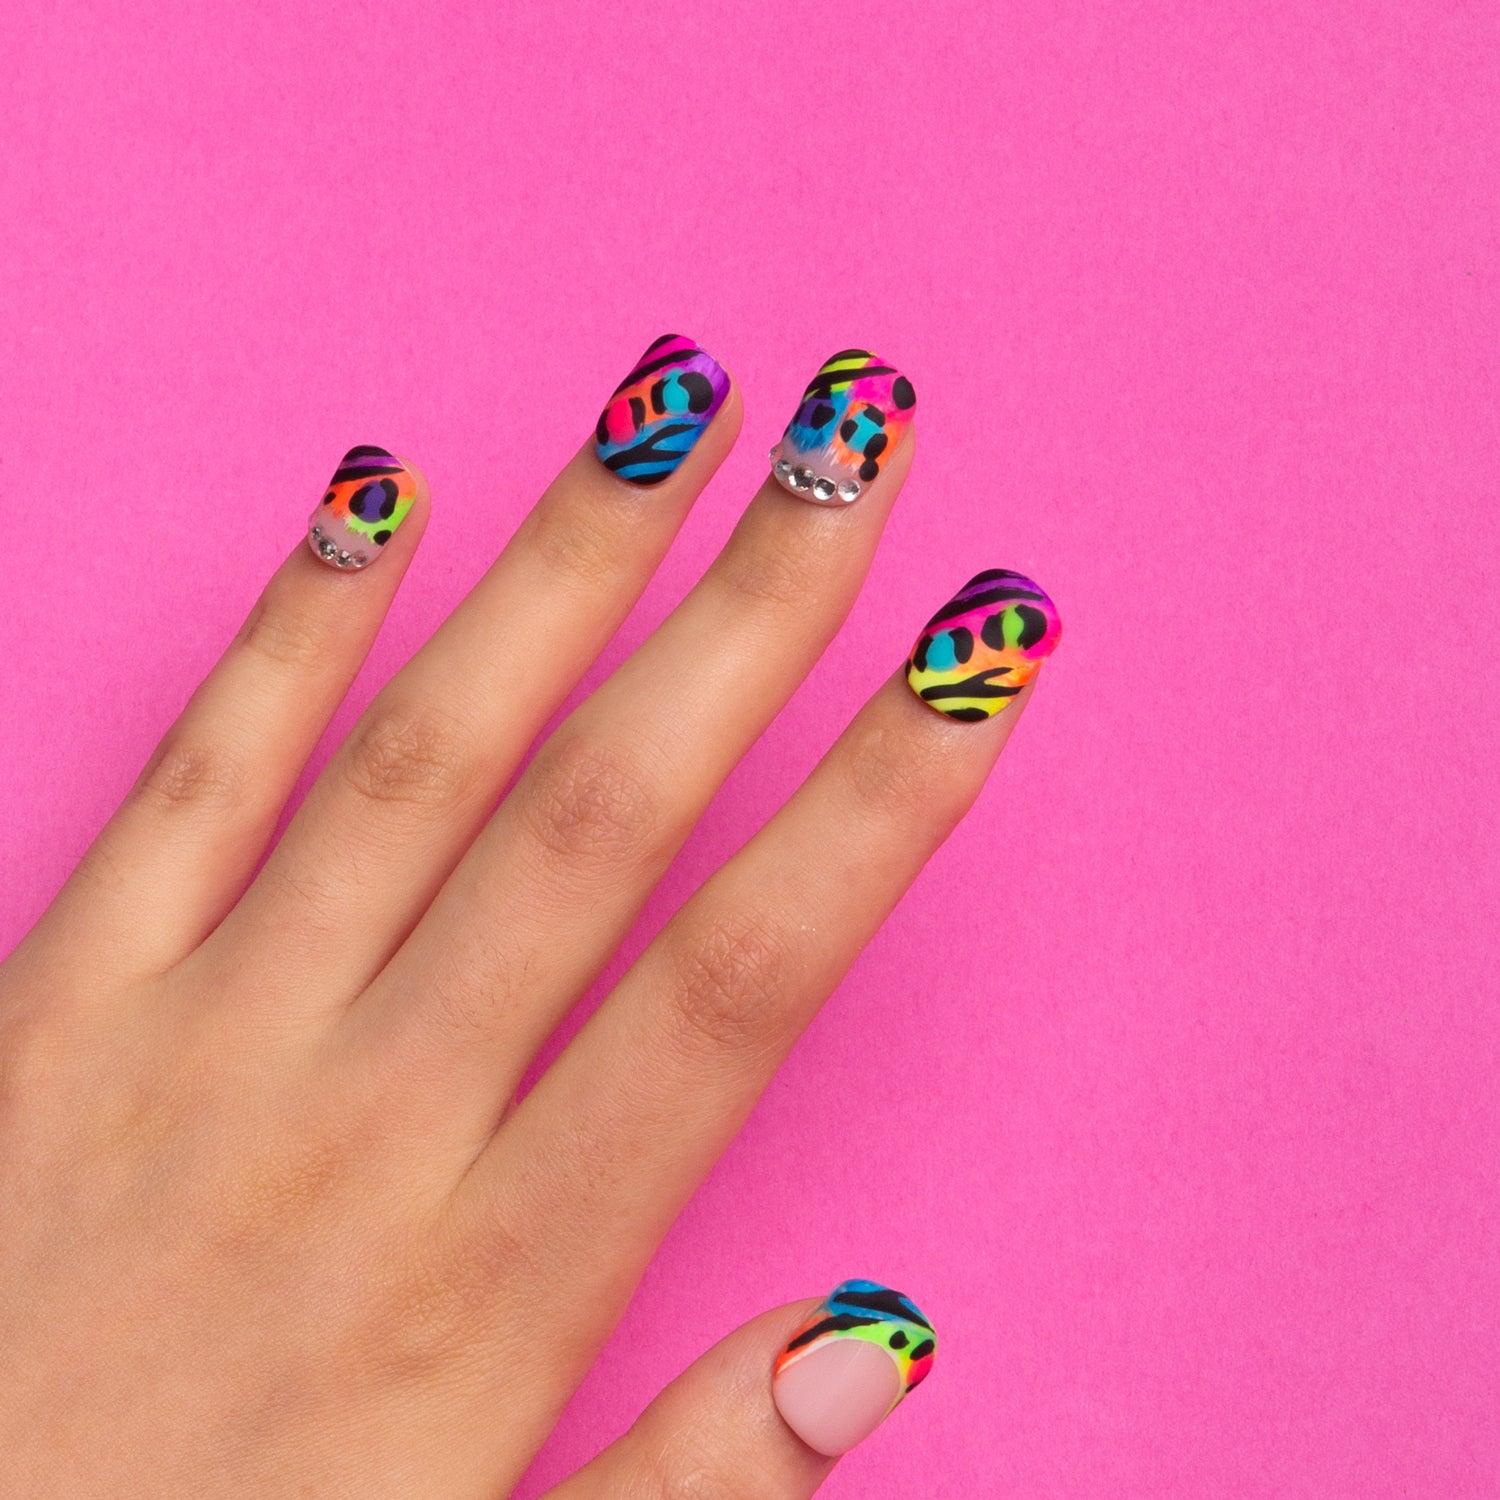 Hand with press-on acrylic nails featuring colorful bright French tips and leopard prints on a pink background